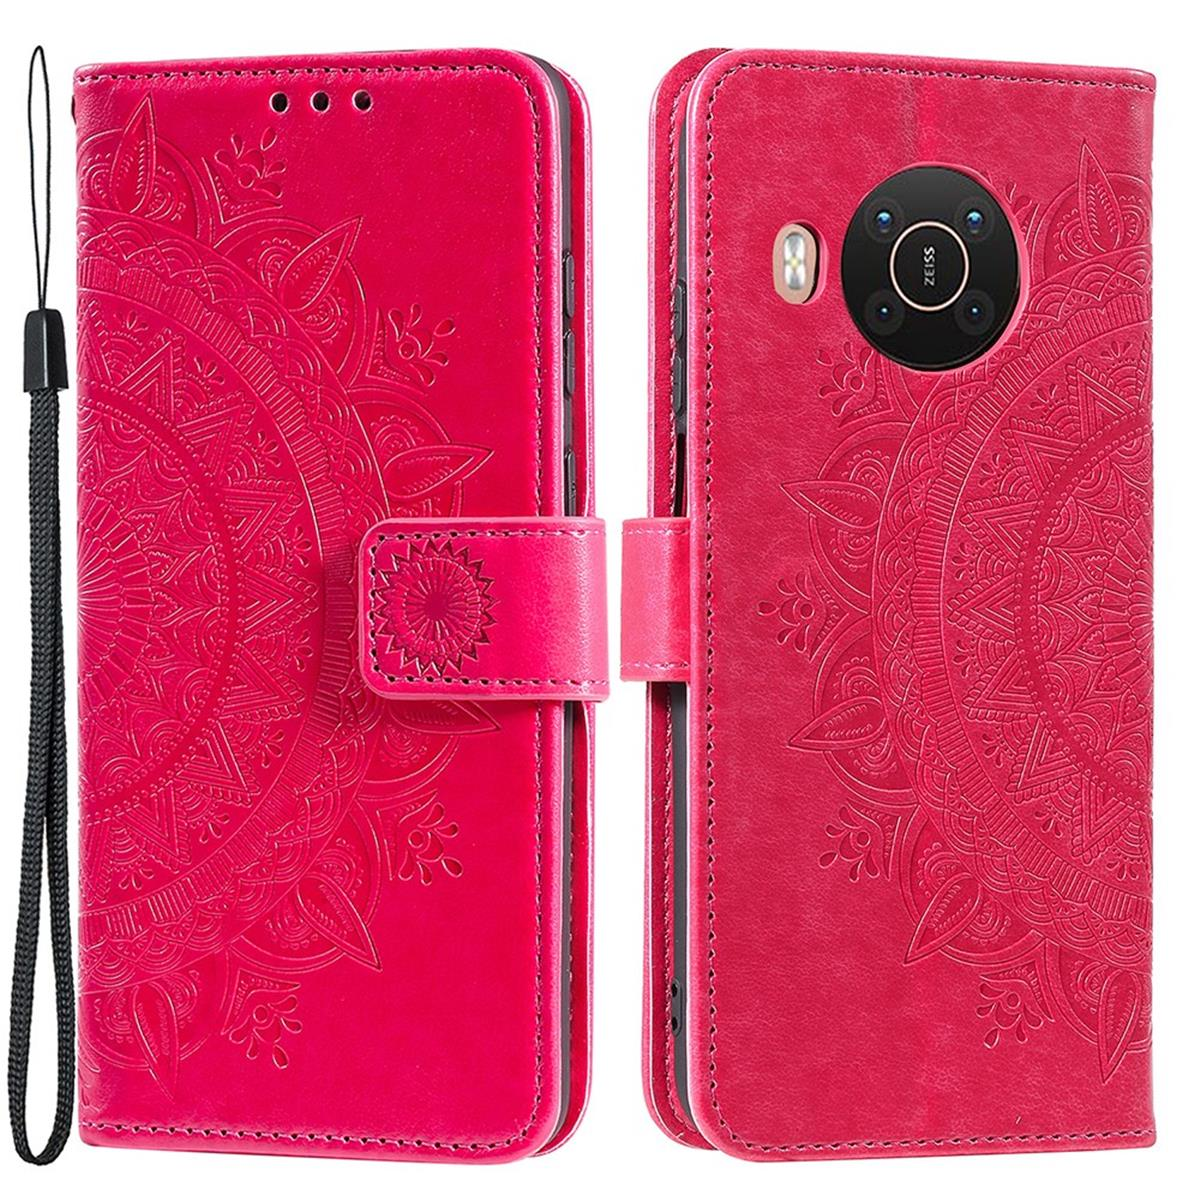 mit Bookcover, COVERKINGZ Muster, Mandala Klapphülle Pink Nokia, X10/X20,